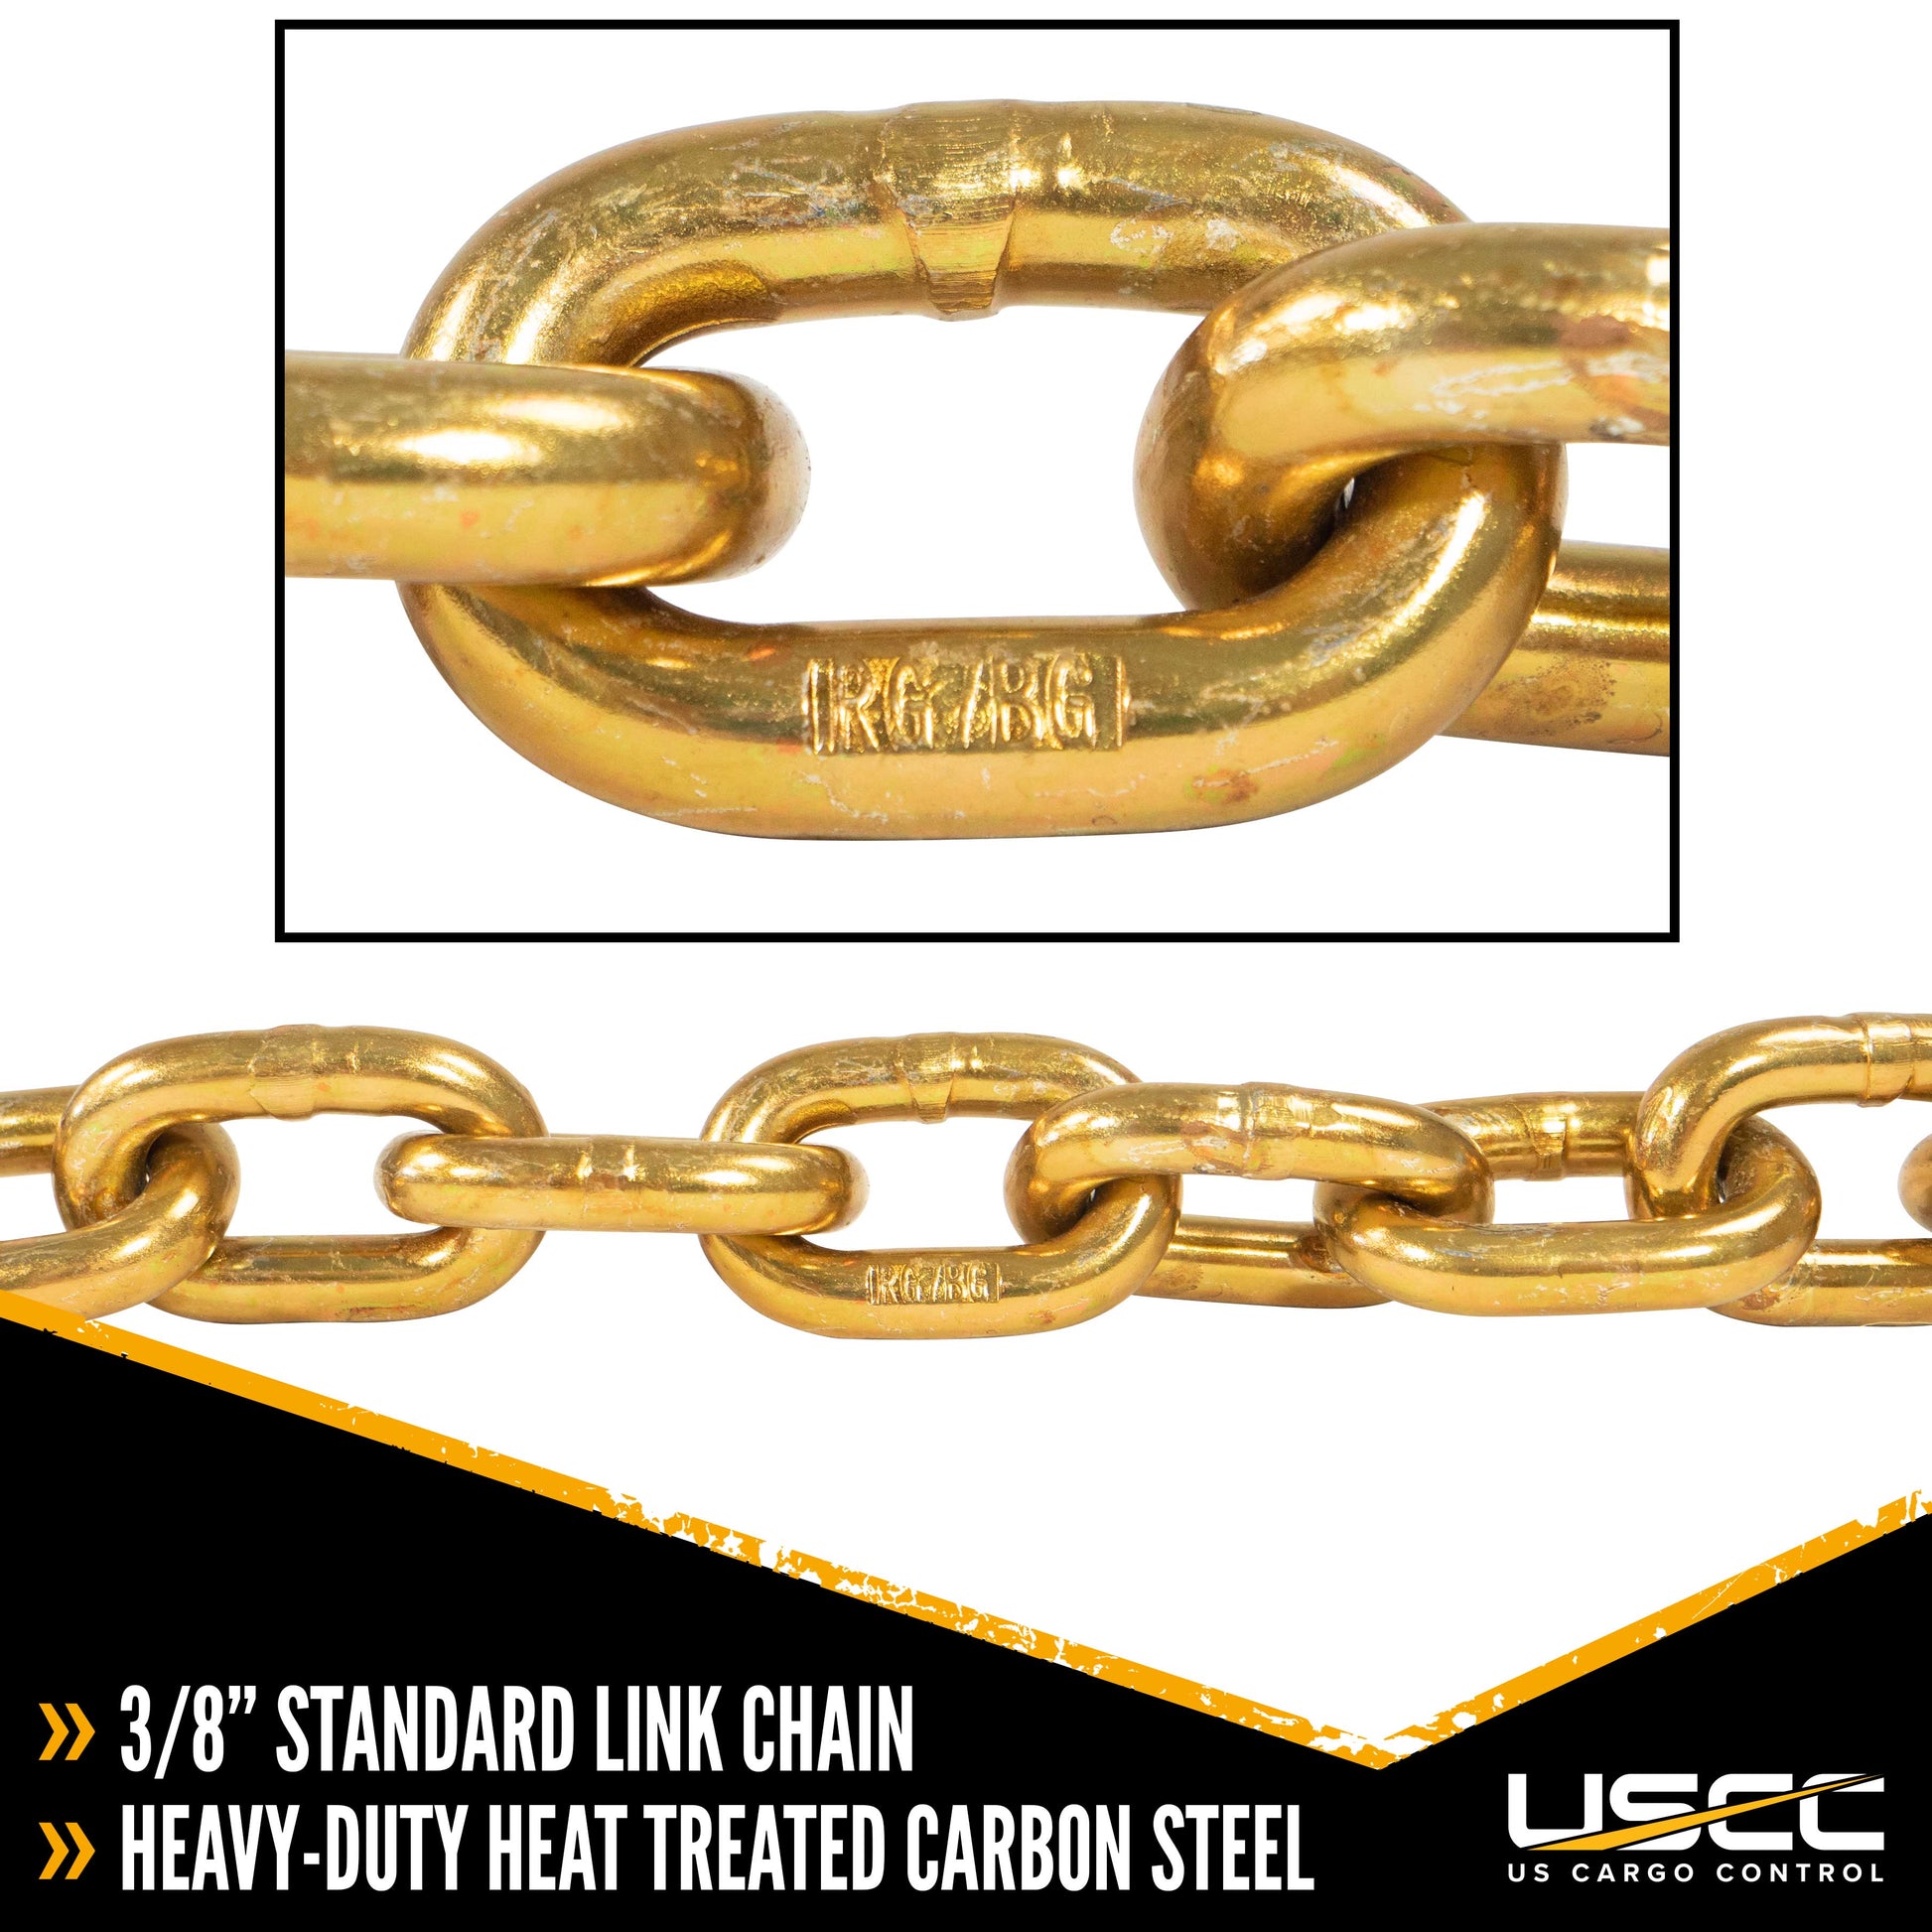 Transport Chain Grade 70 38 inch x 25 foot Standard Link image 2 of 8